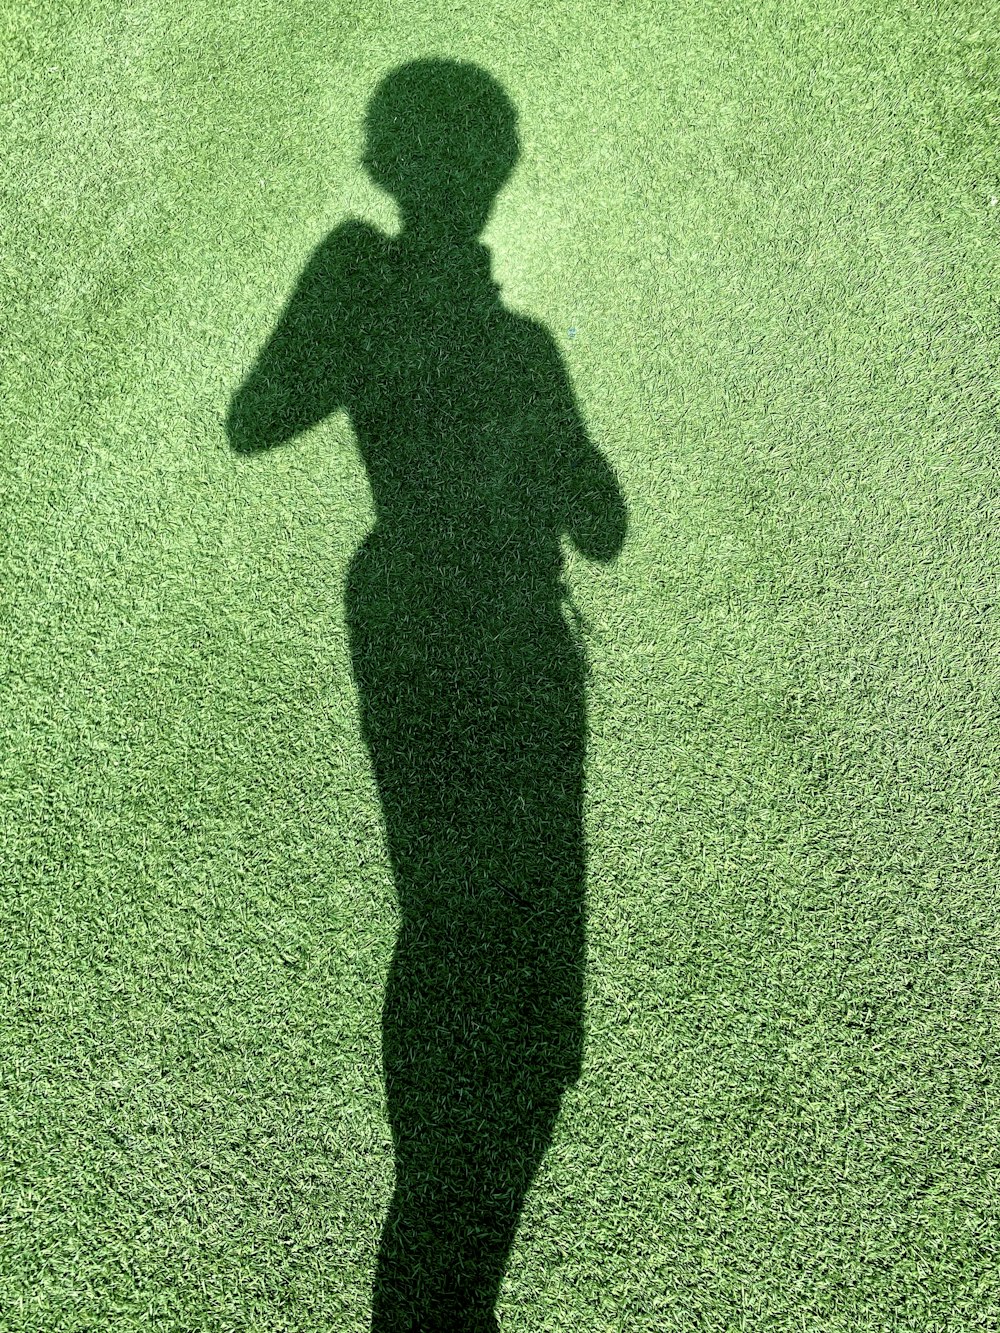 a shadow of a person holding a baseball bat